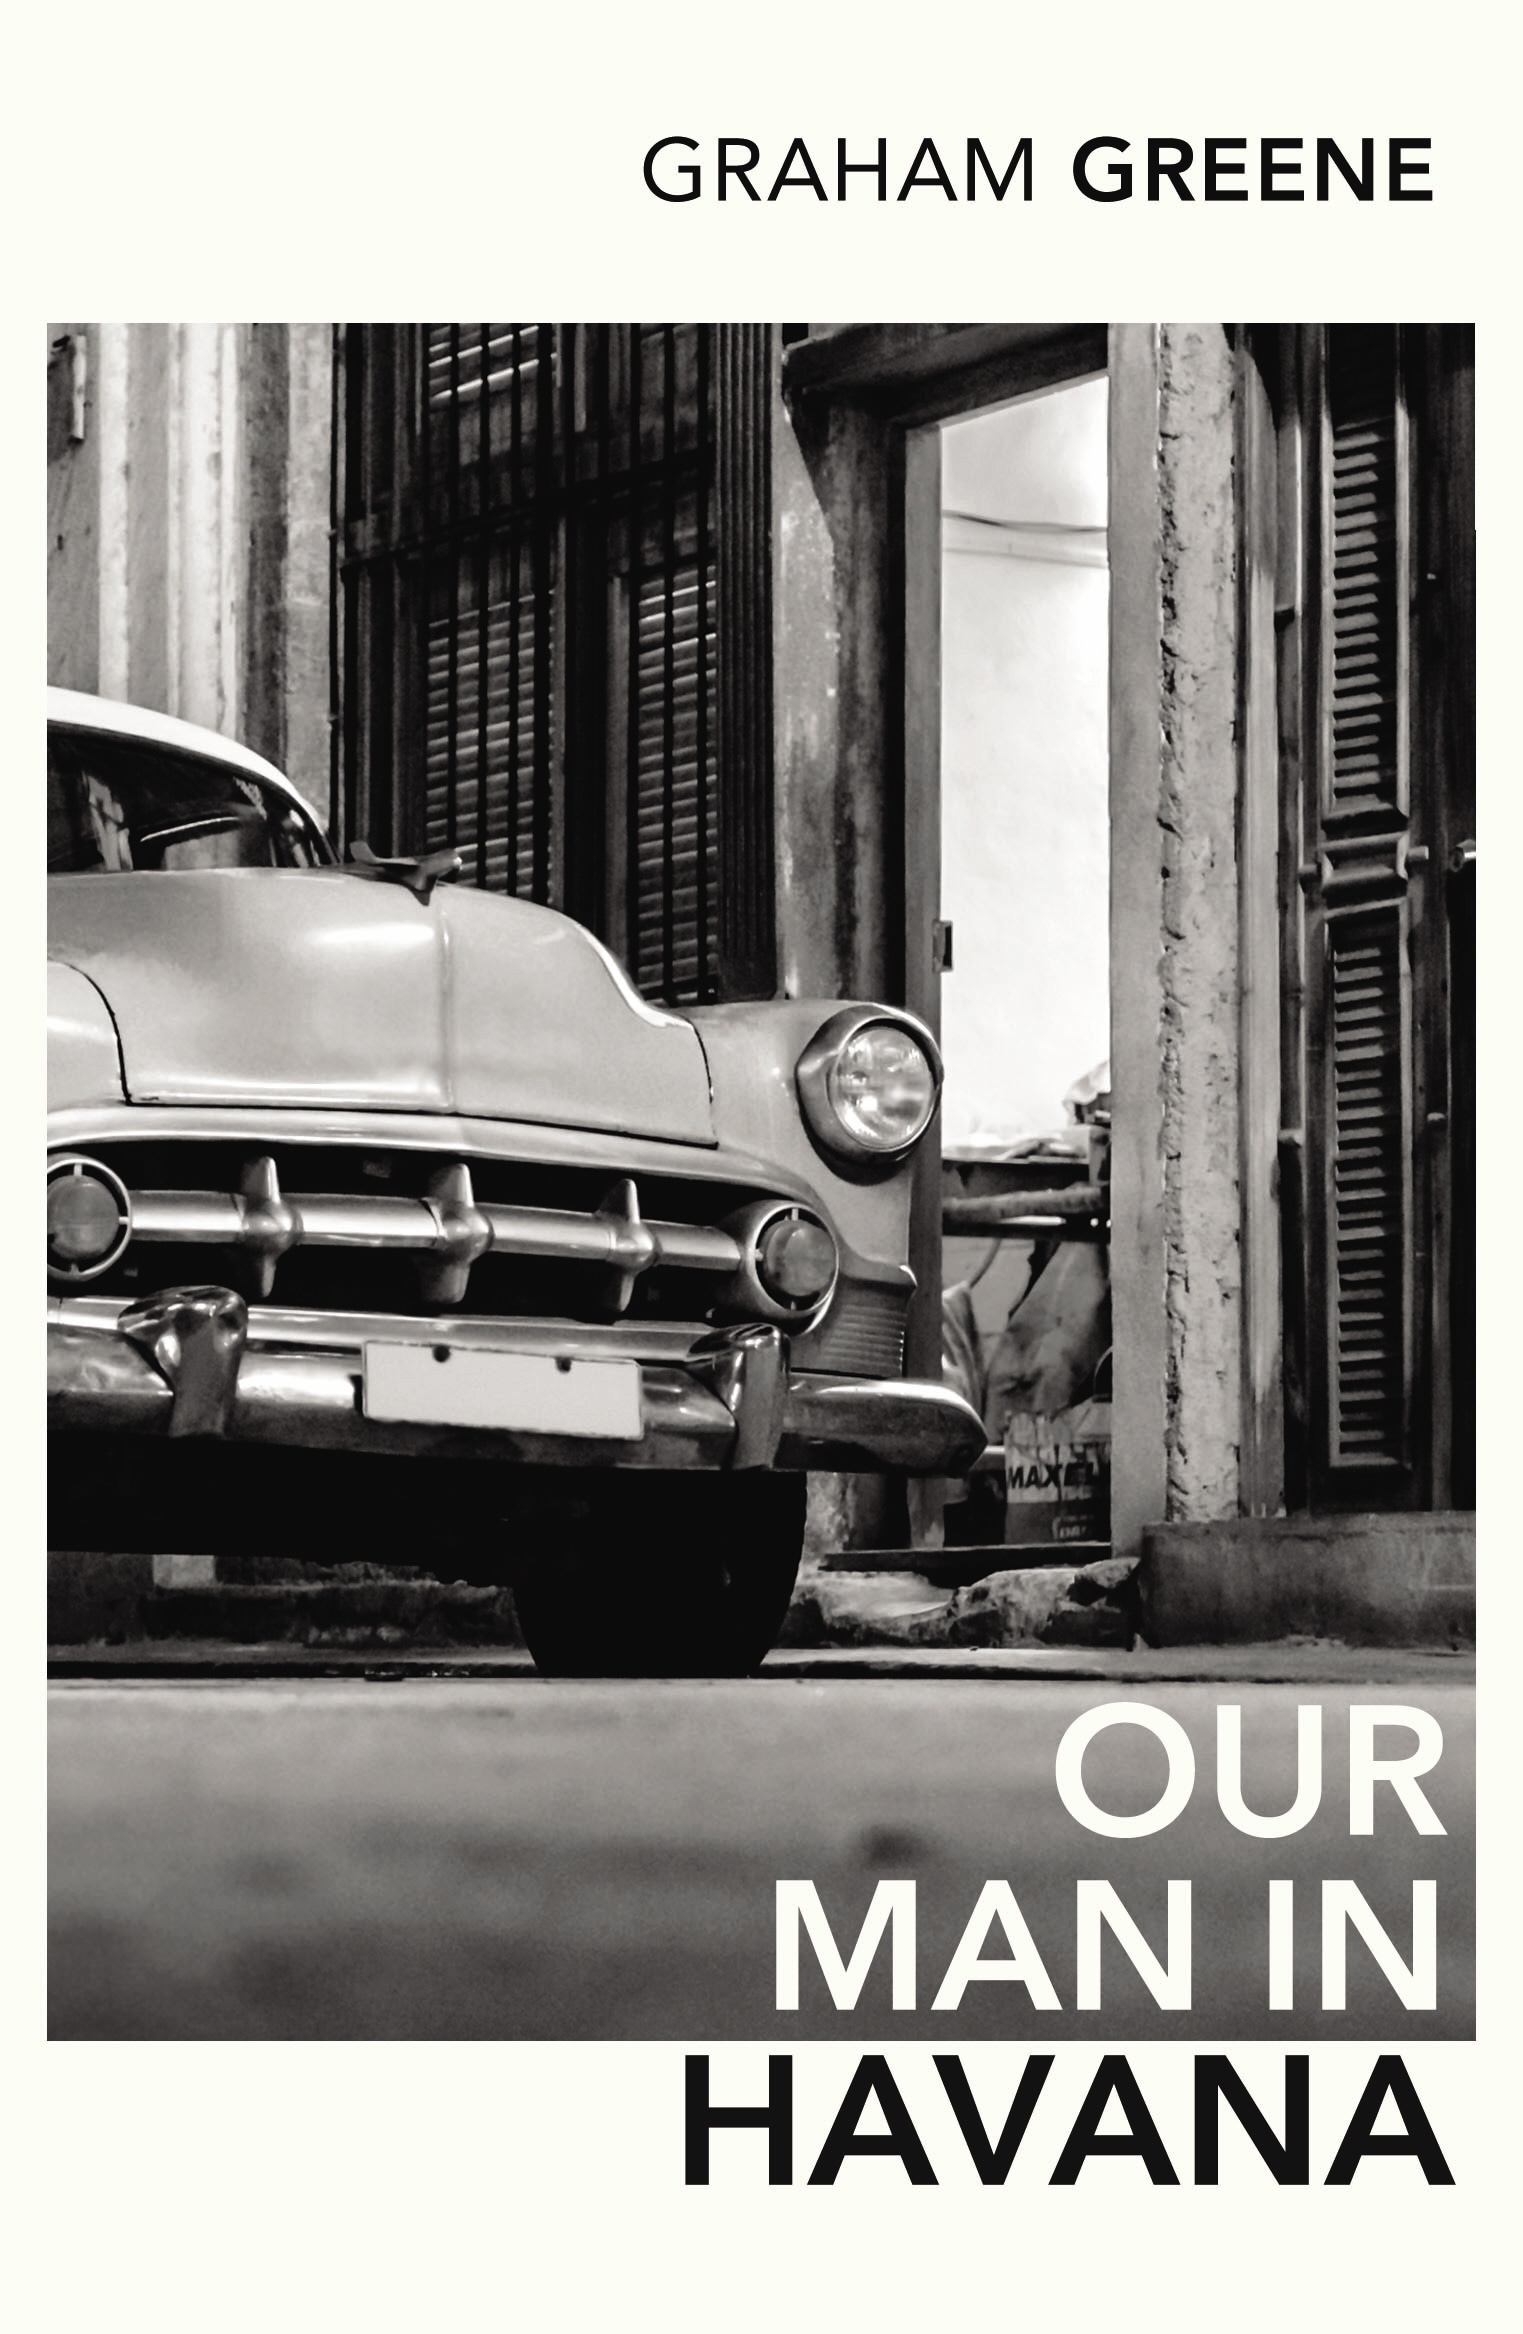 Book “Our Man In Havana” by Graham Greene, Christopher Hitchens — March 1, 2001